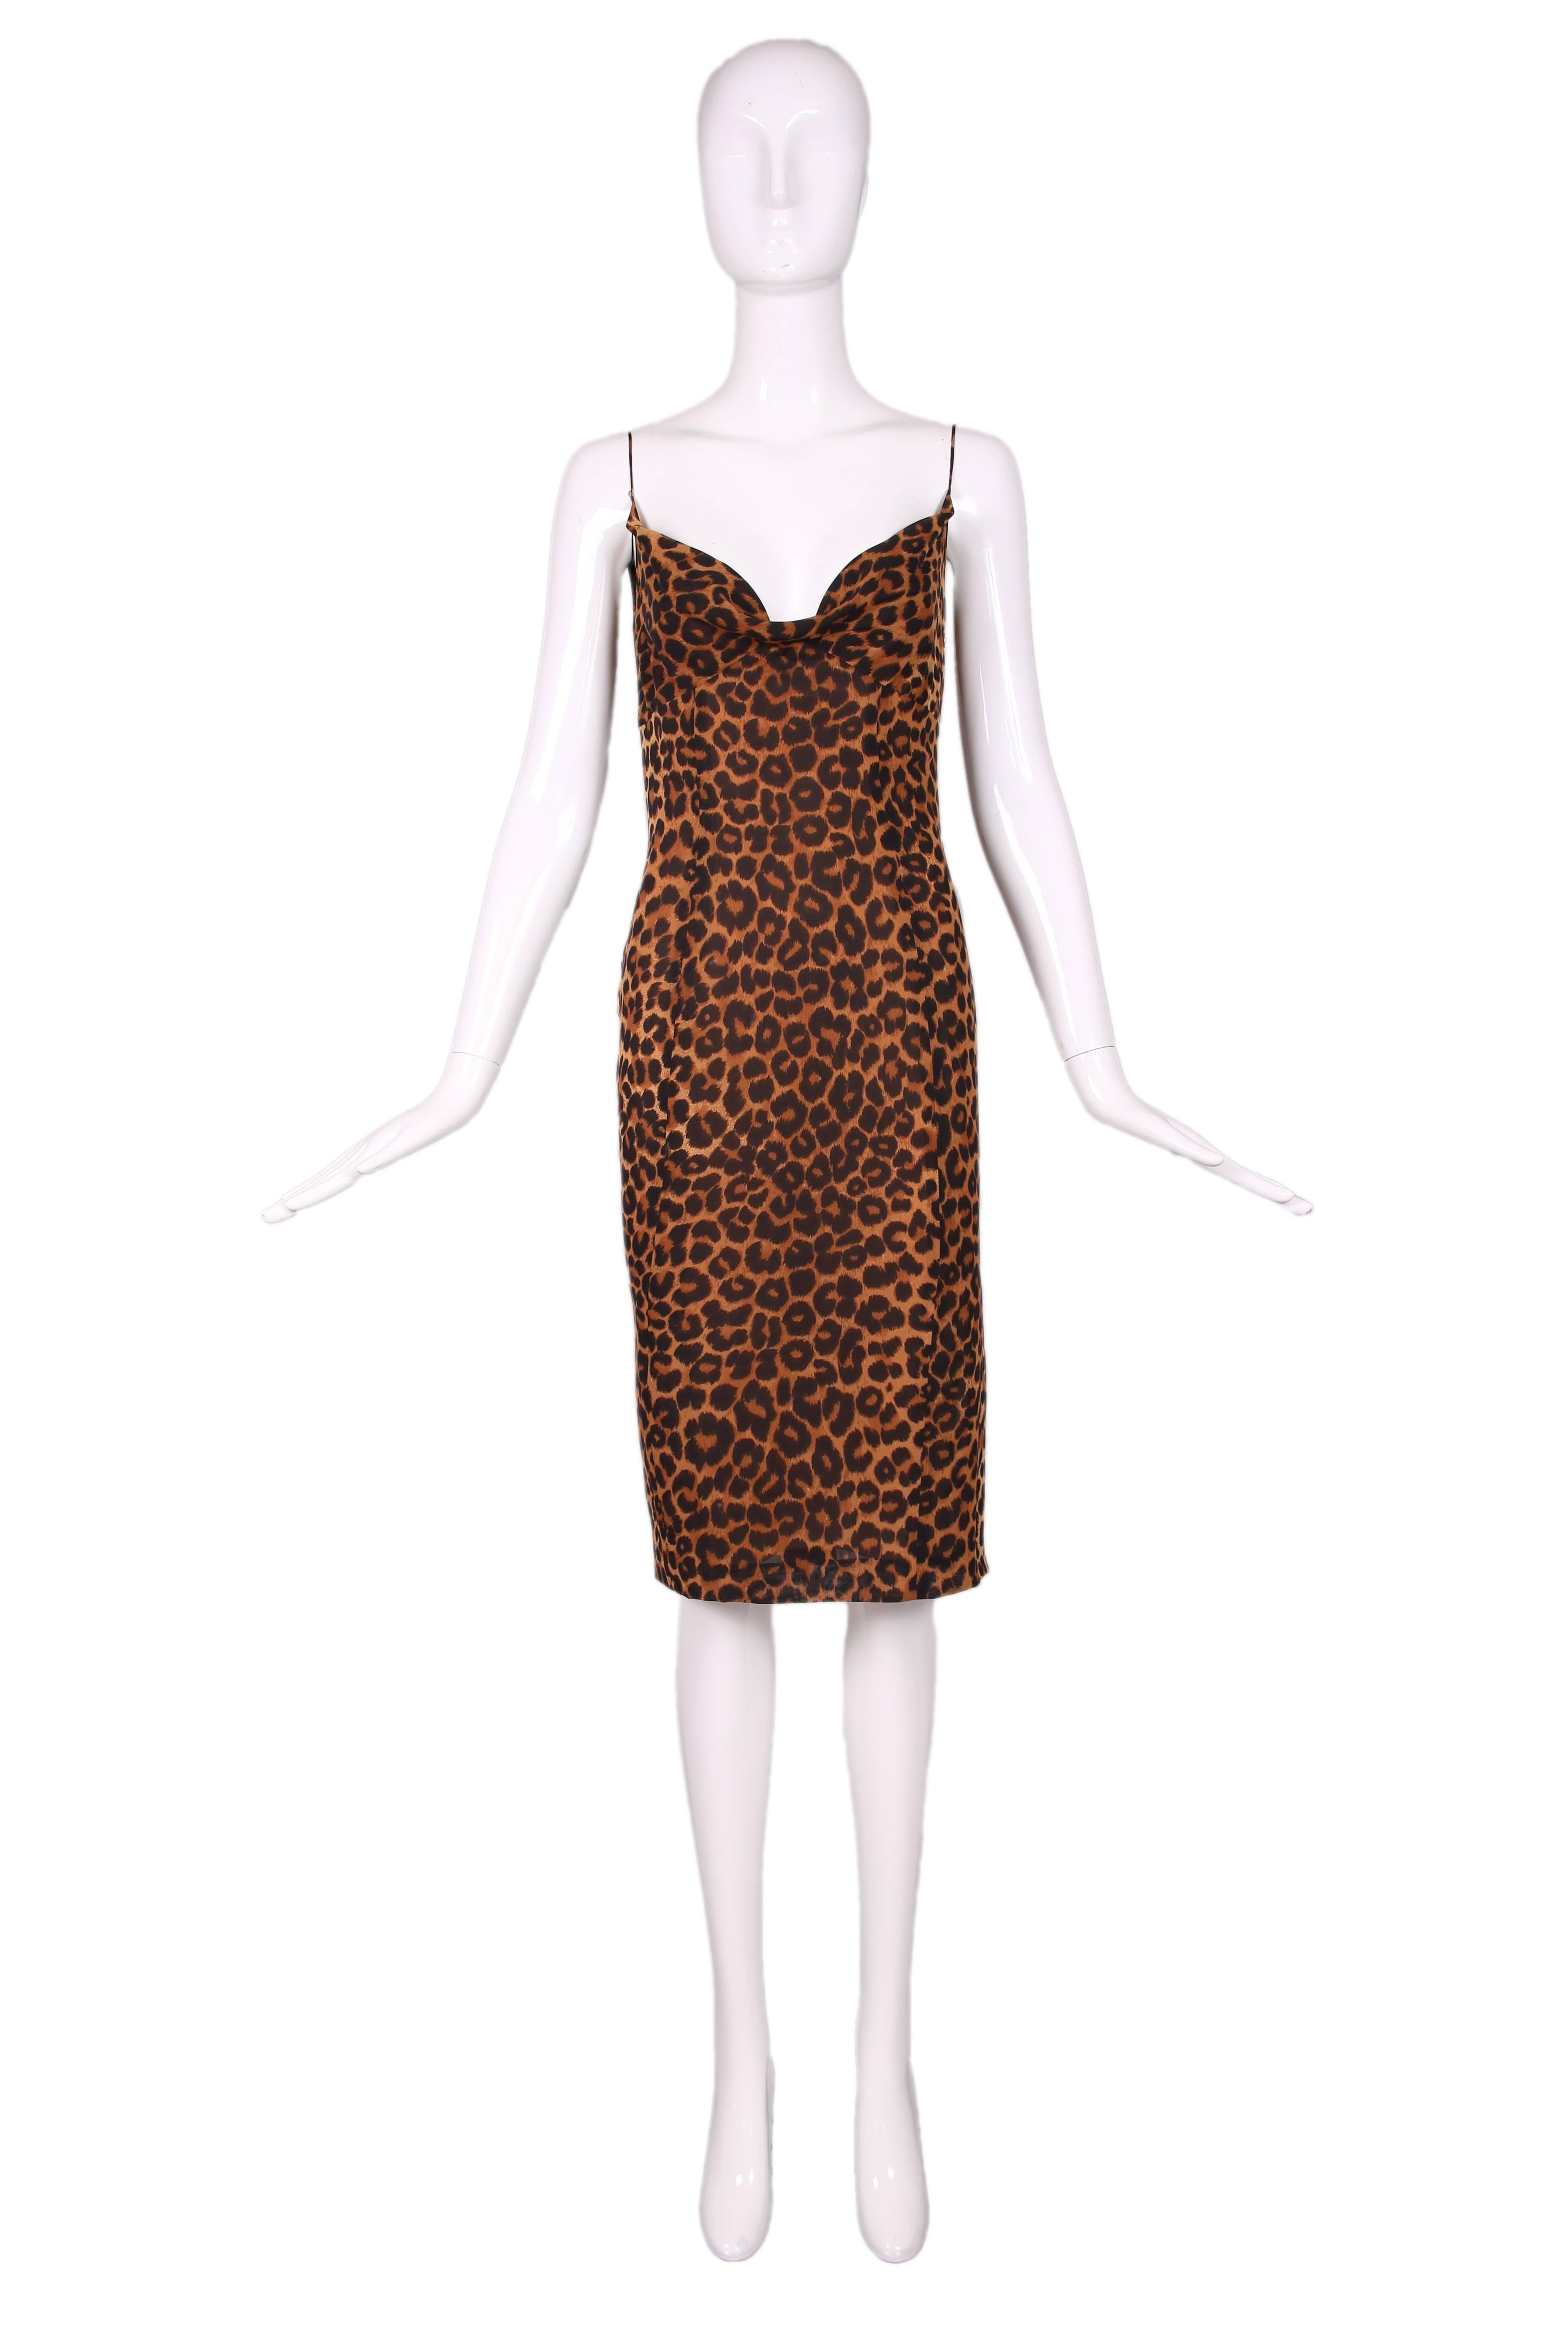 1990's John Galliano silk leopard print slip dress w/slight cowl neck, spaghetti straps and side slit. Zipper closure at side and lined in silk.In excellent condition. Size US 4.
MEASUREMENTS:
Bust - 34